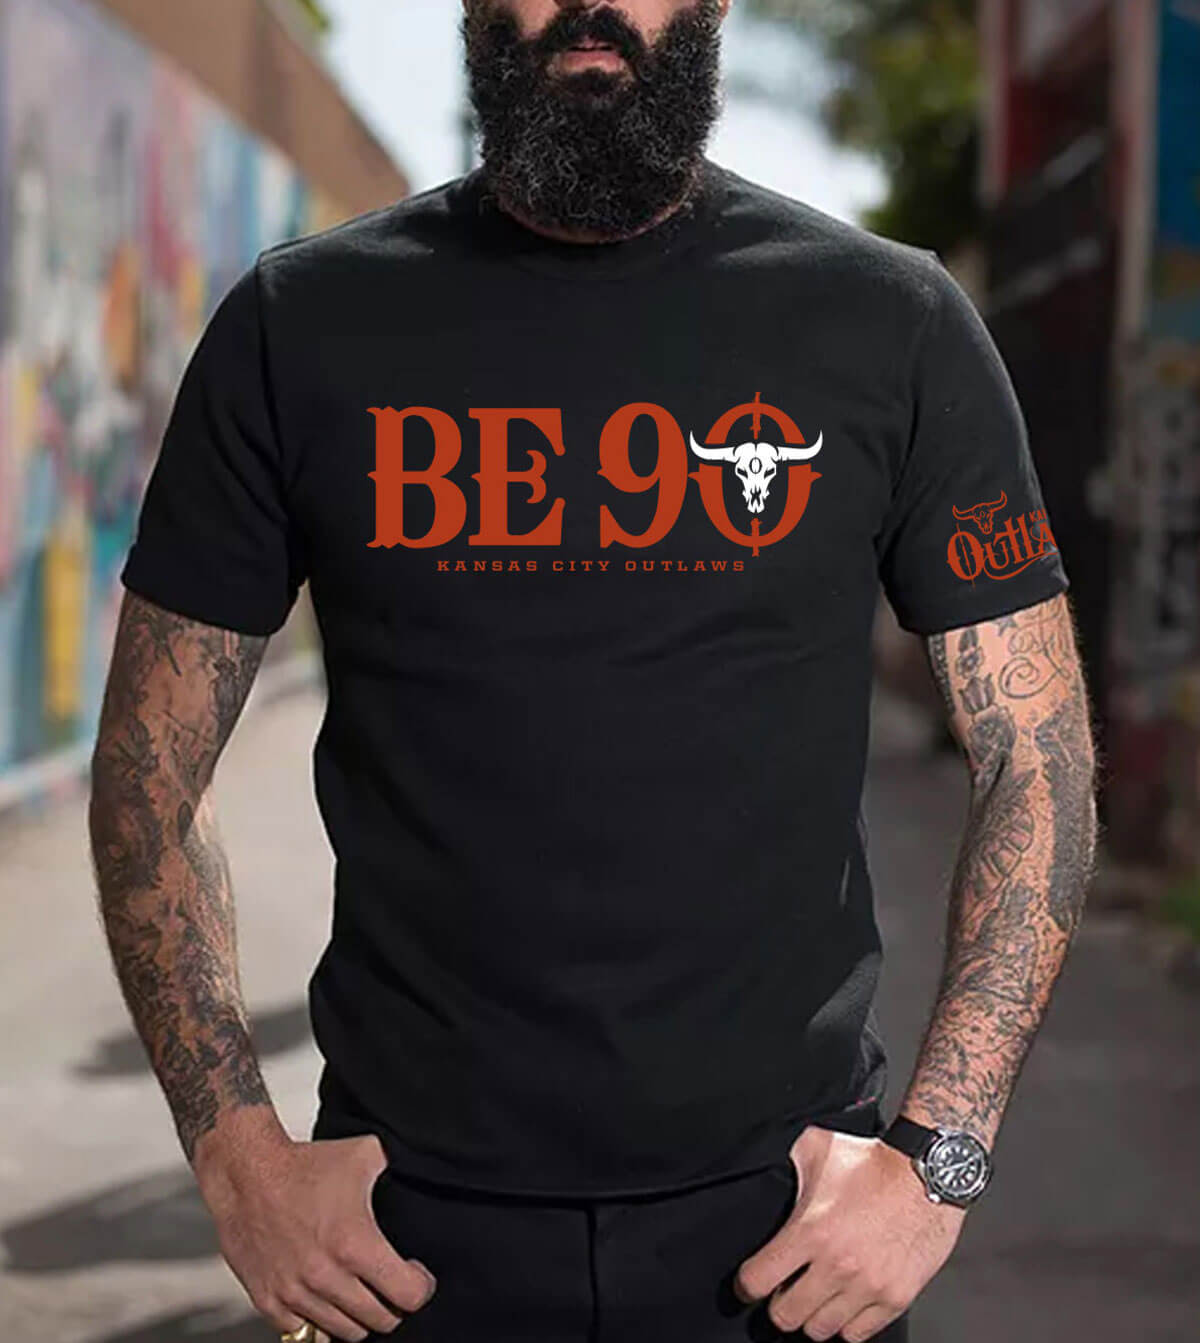 Front view of the black "Be 90" T-Shirt